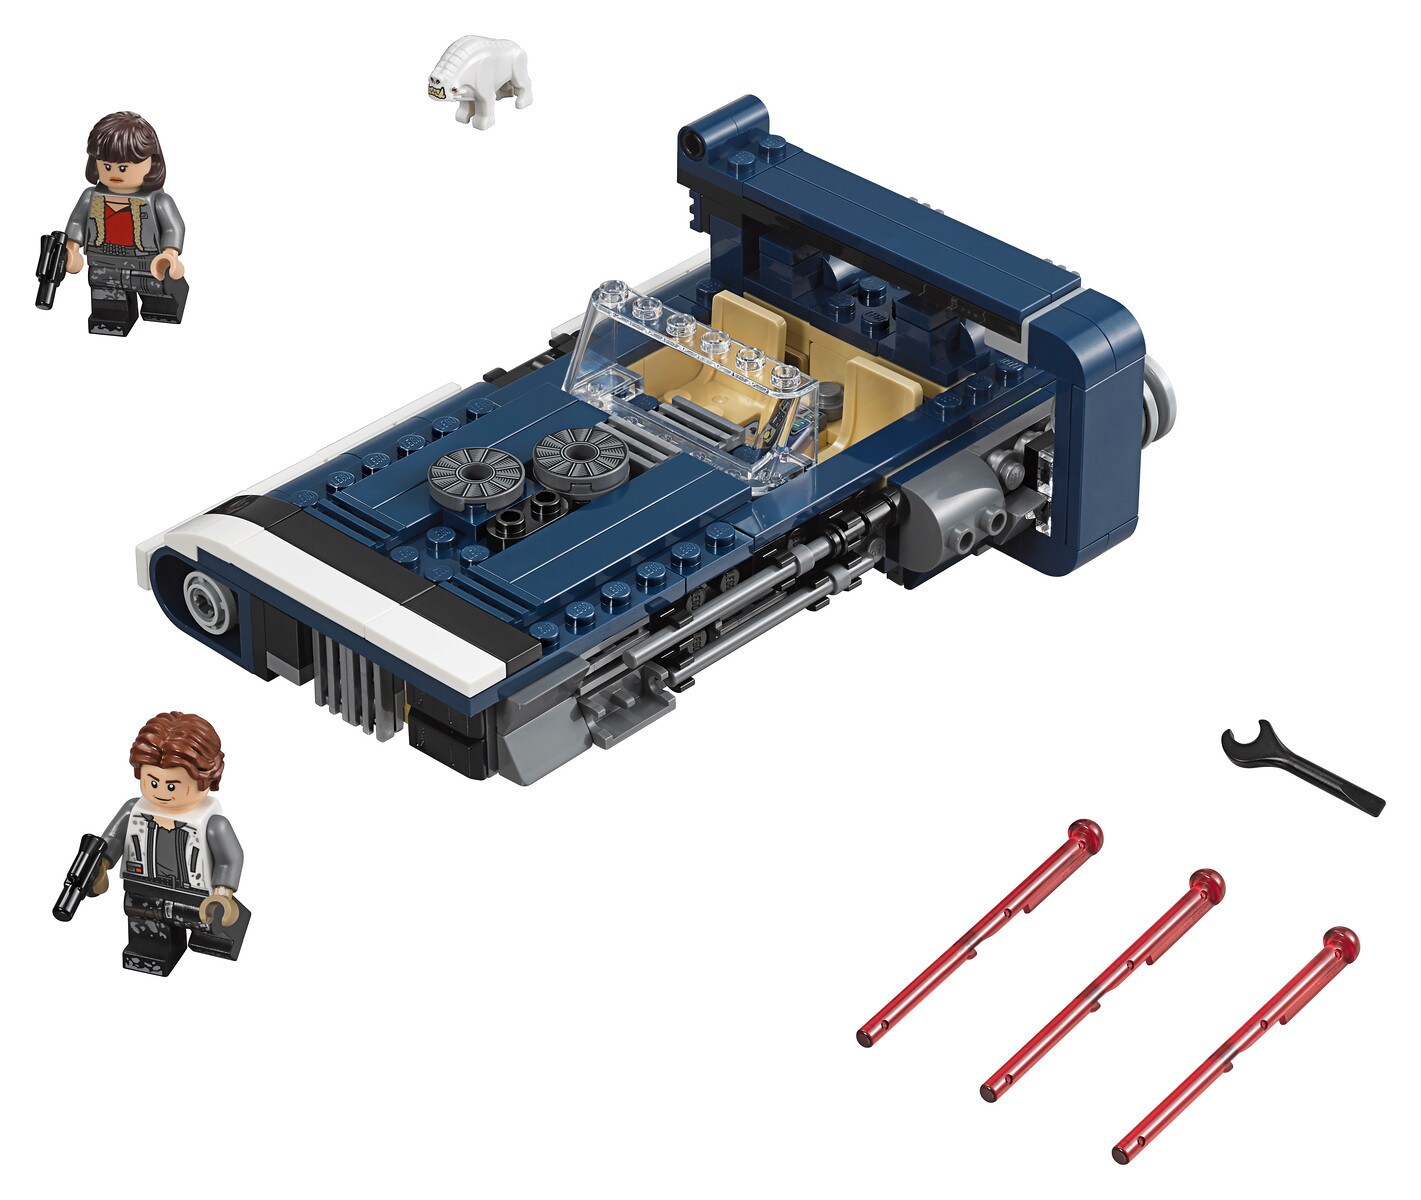 A LEGO landspeeder with Han and Qi'ra figurines.